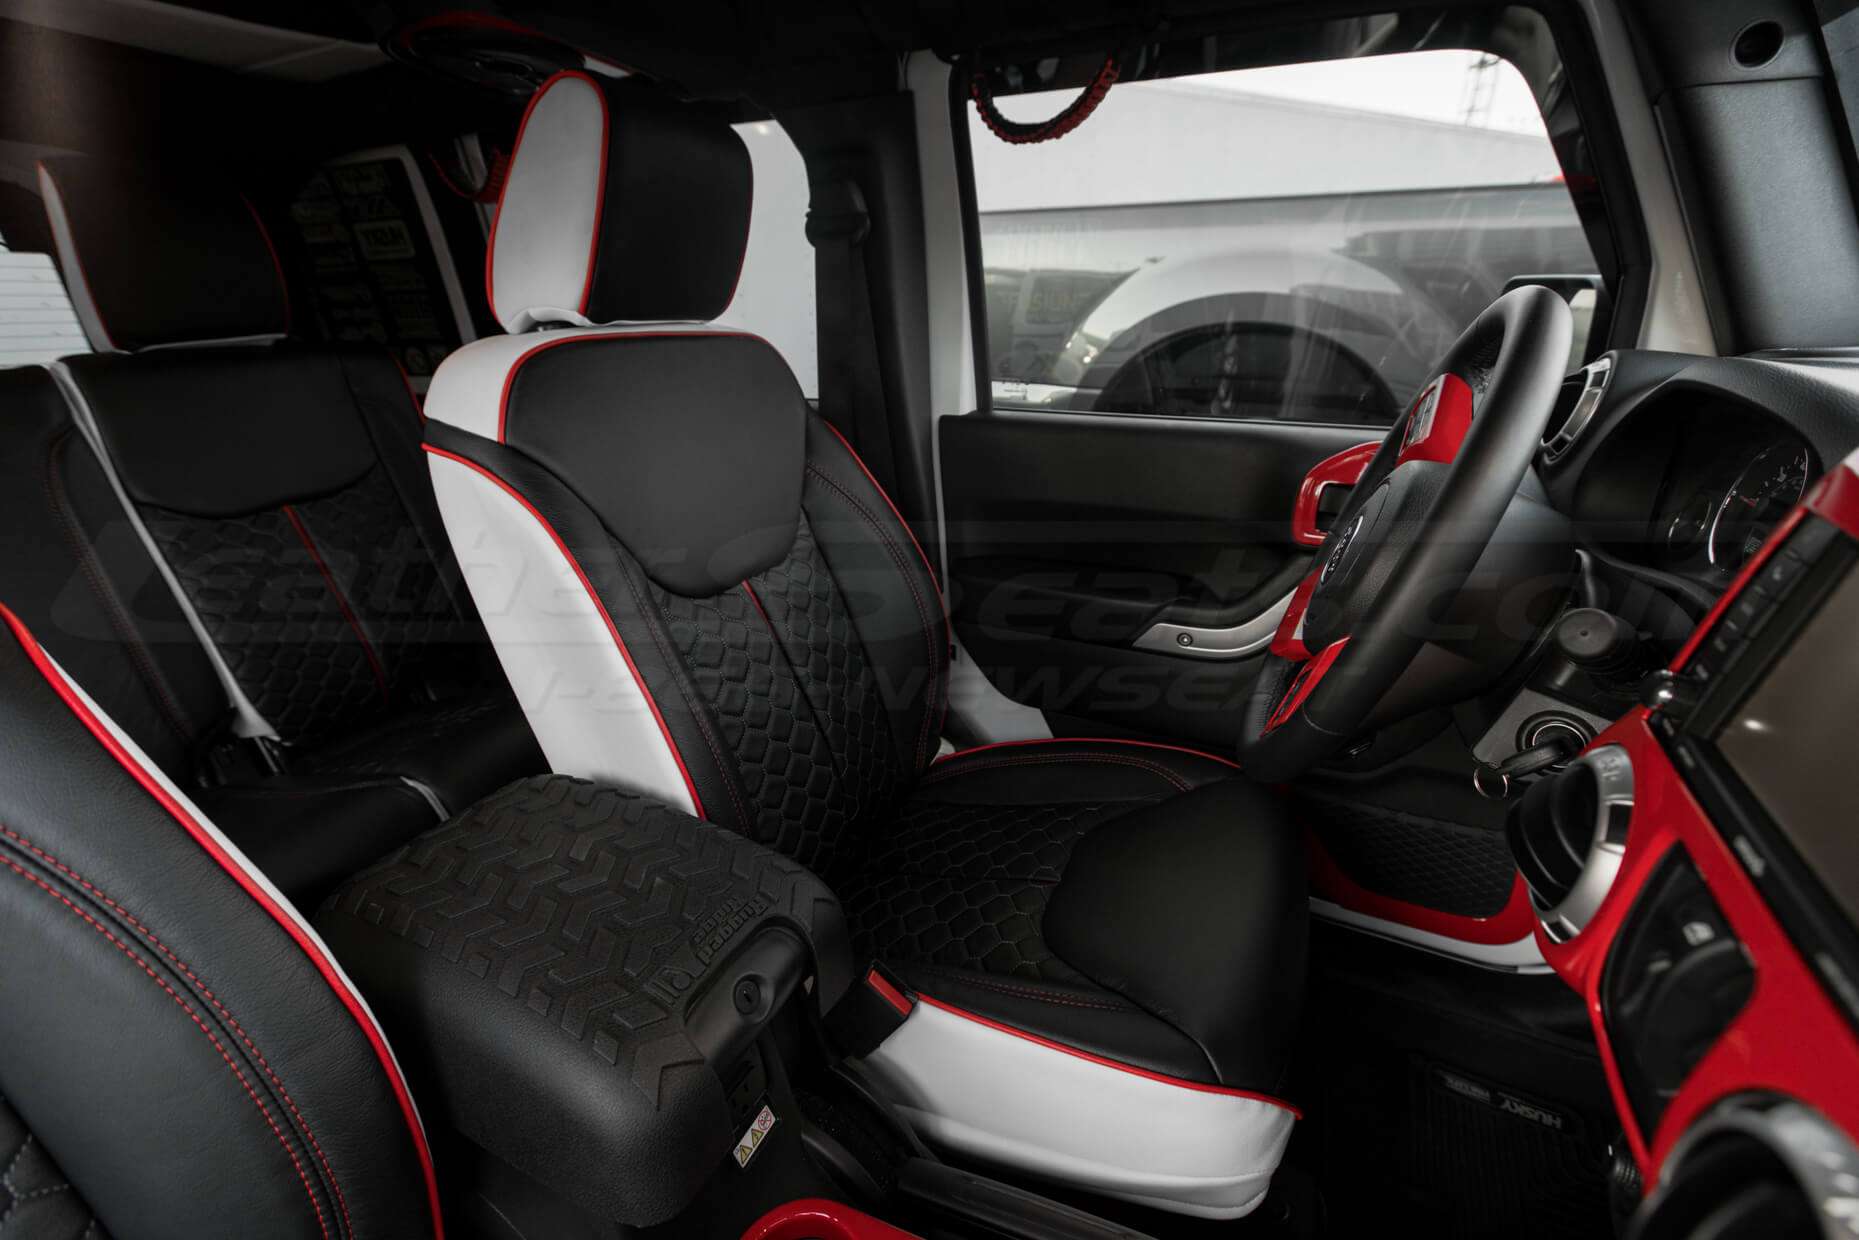 2013-2018 Jeep Wrangler Reticulated Hex installed Upholstery Kit - White/Black/Bright Red - Front drivers seat